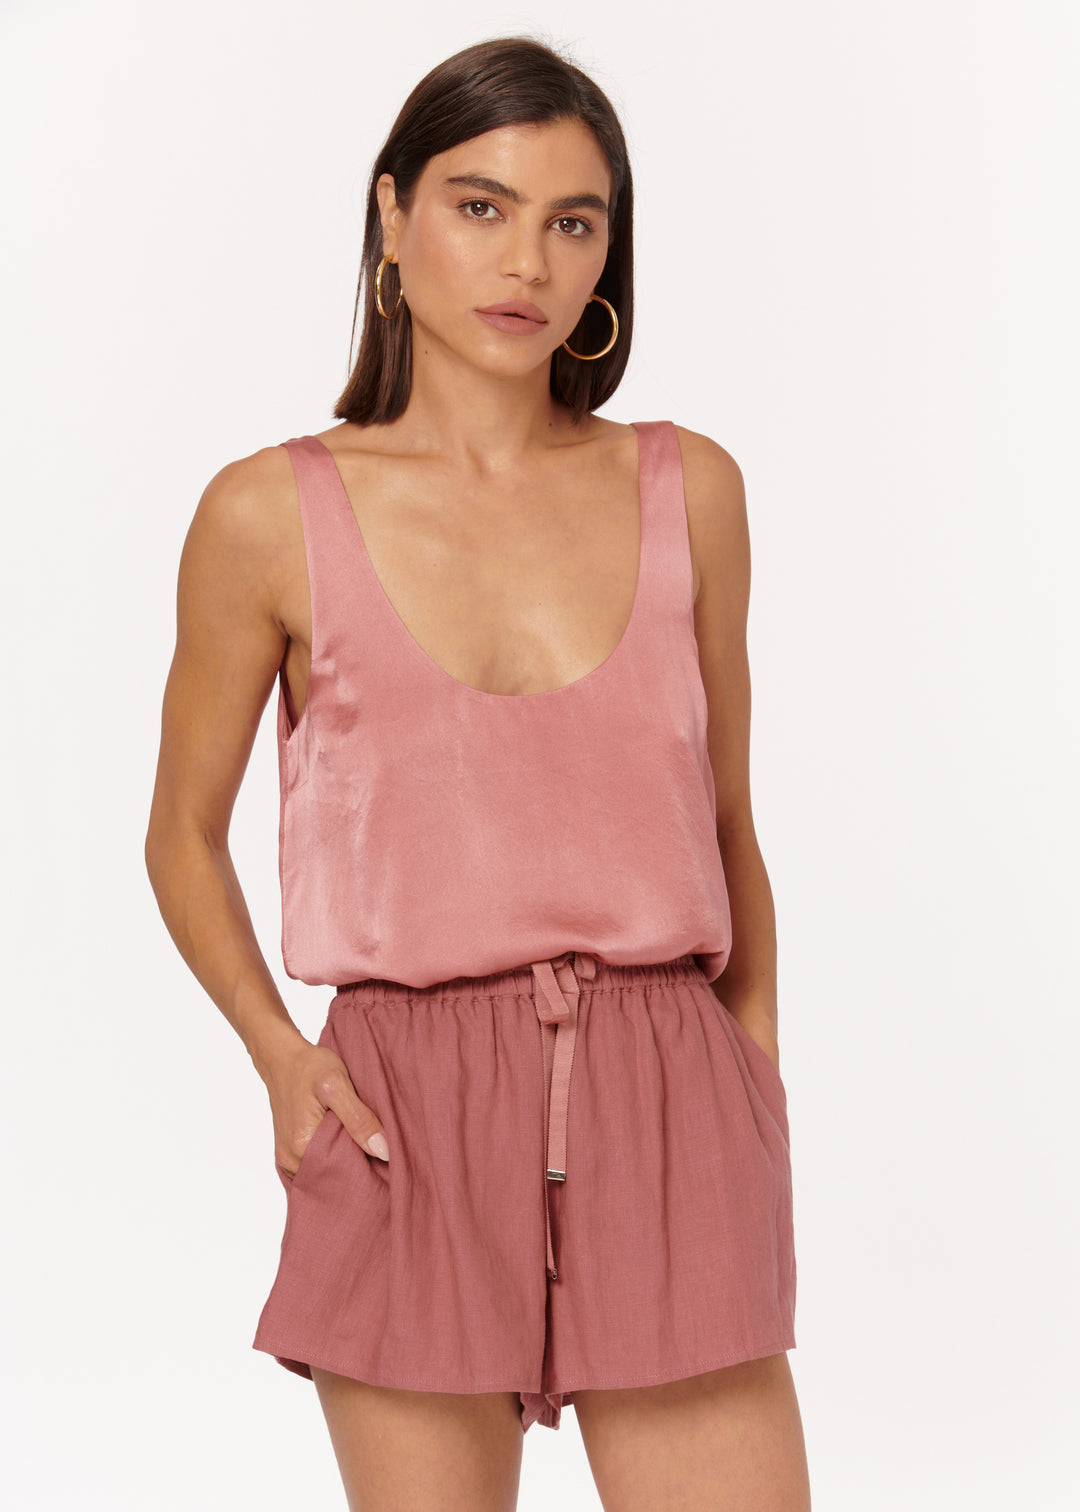 Cami NYC - Racer Charmeuse Cami in Raspberry